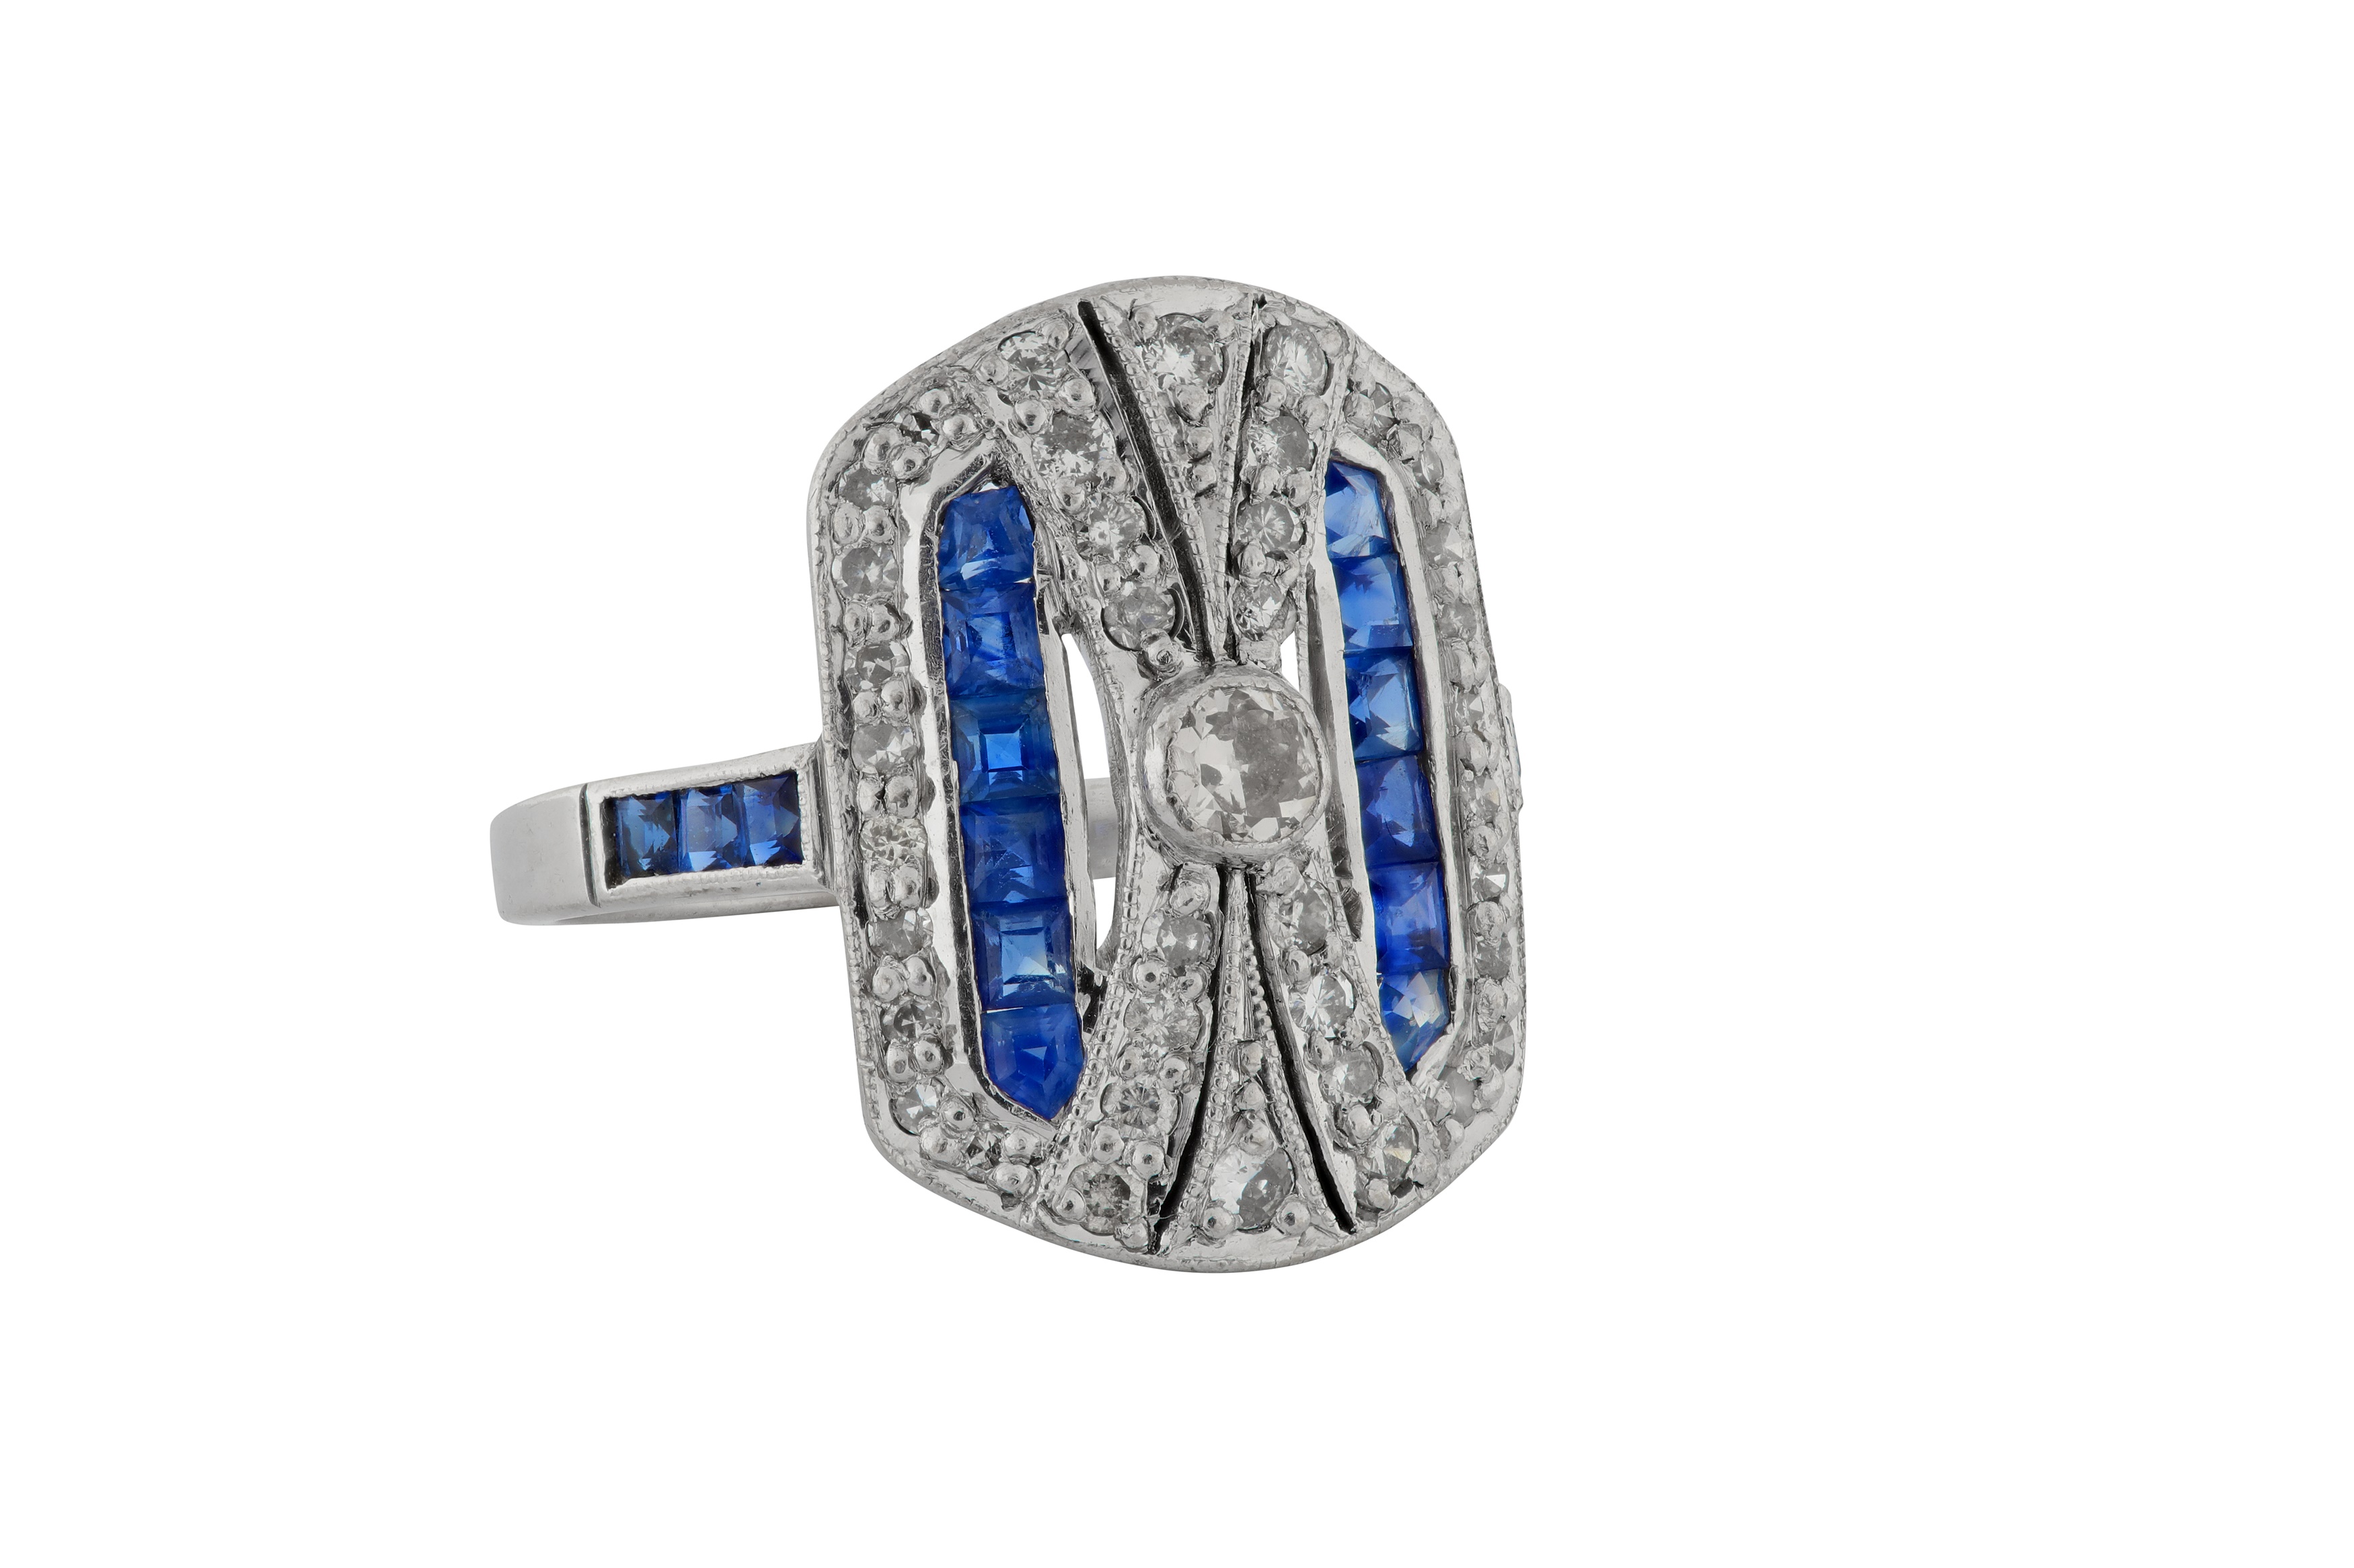 A SAPPHIRE AND DIAMOND GEOMETRIC RING - Image 2 of 4